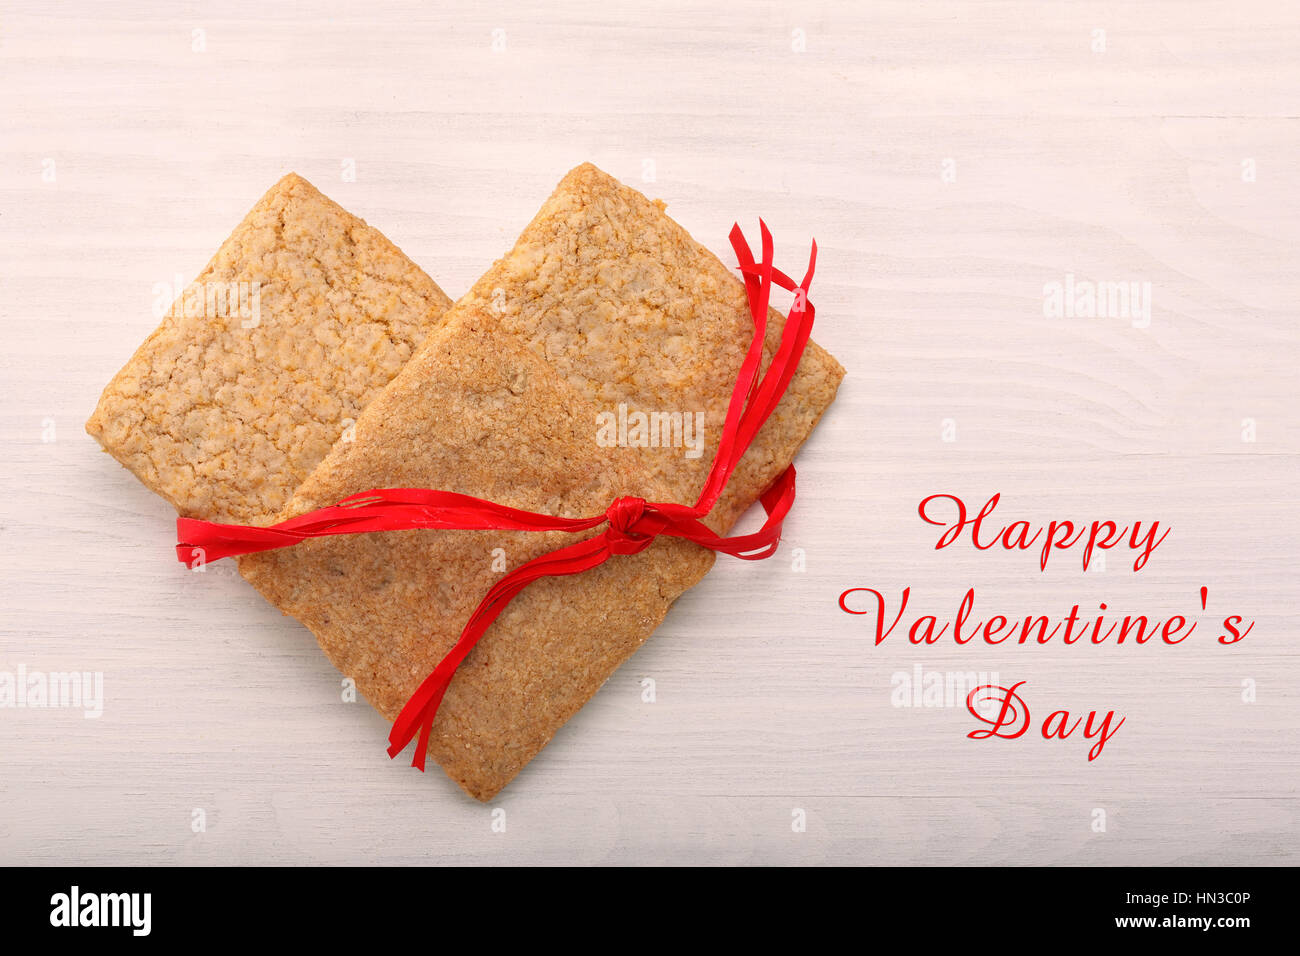 Delicious crunchy cookie in hearts shapes and inscription Happy Valentines Day Stock Photo